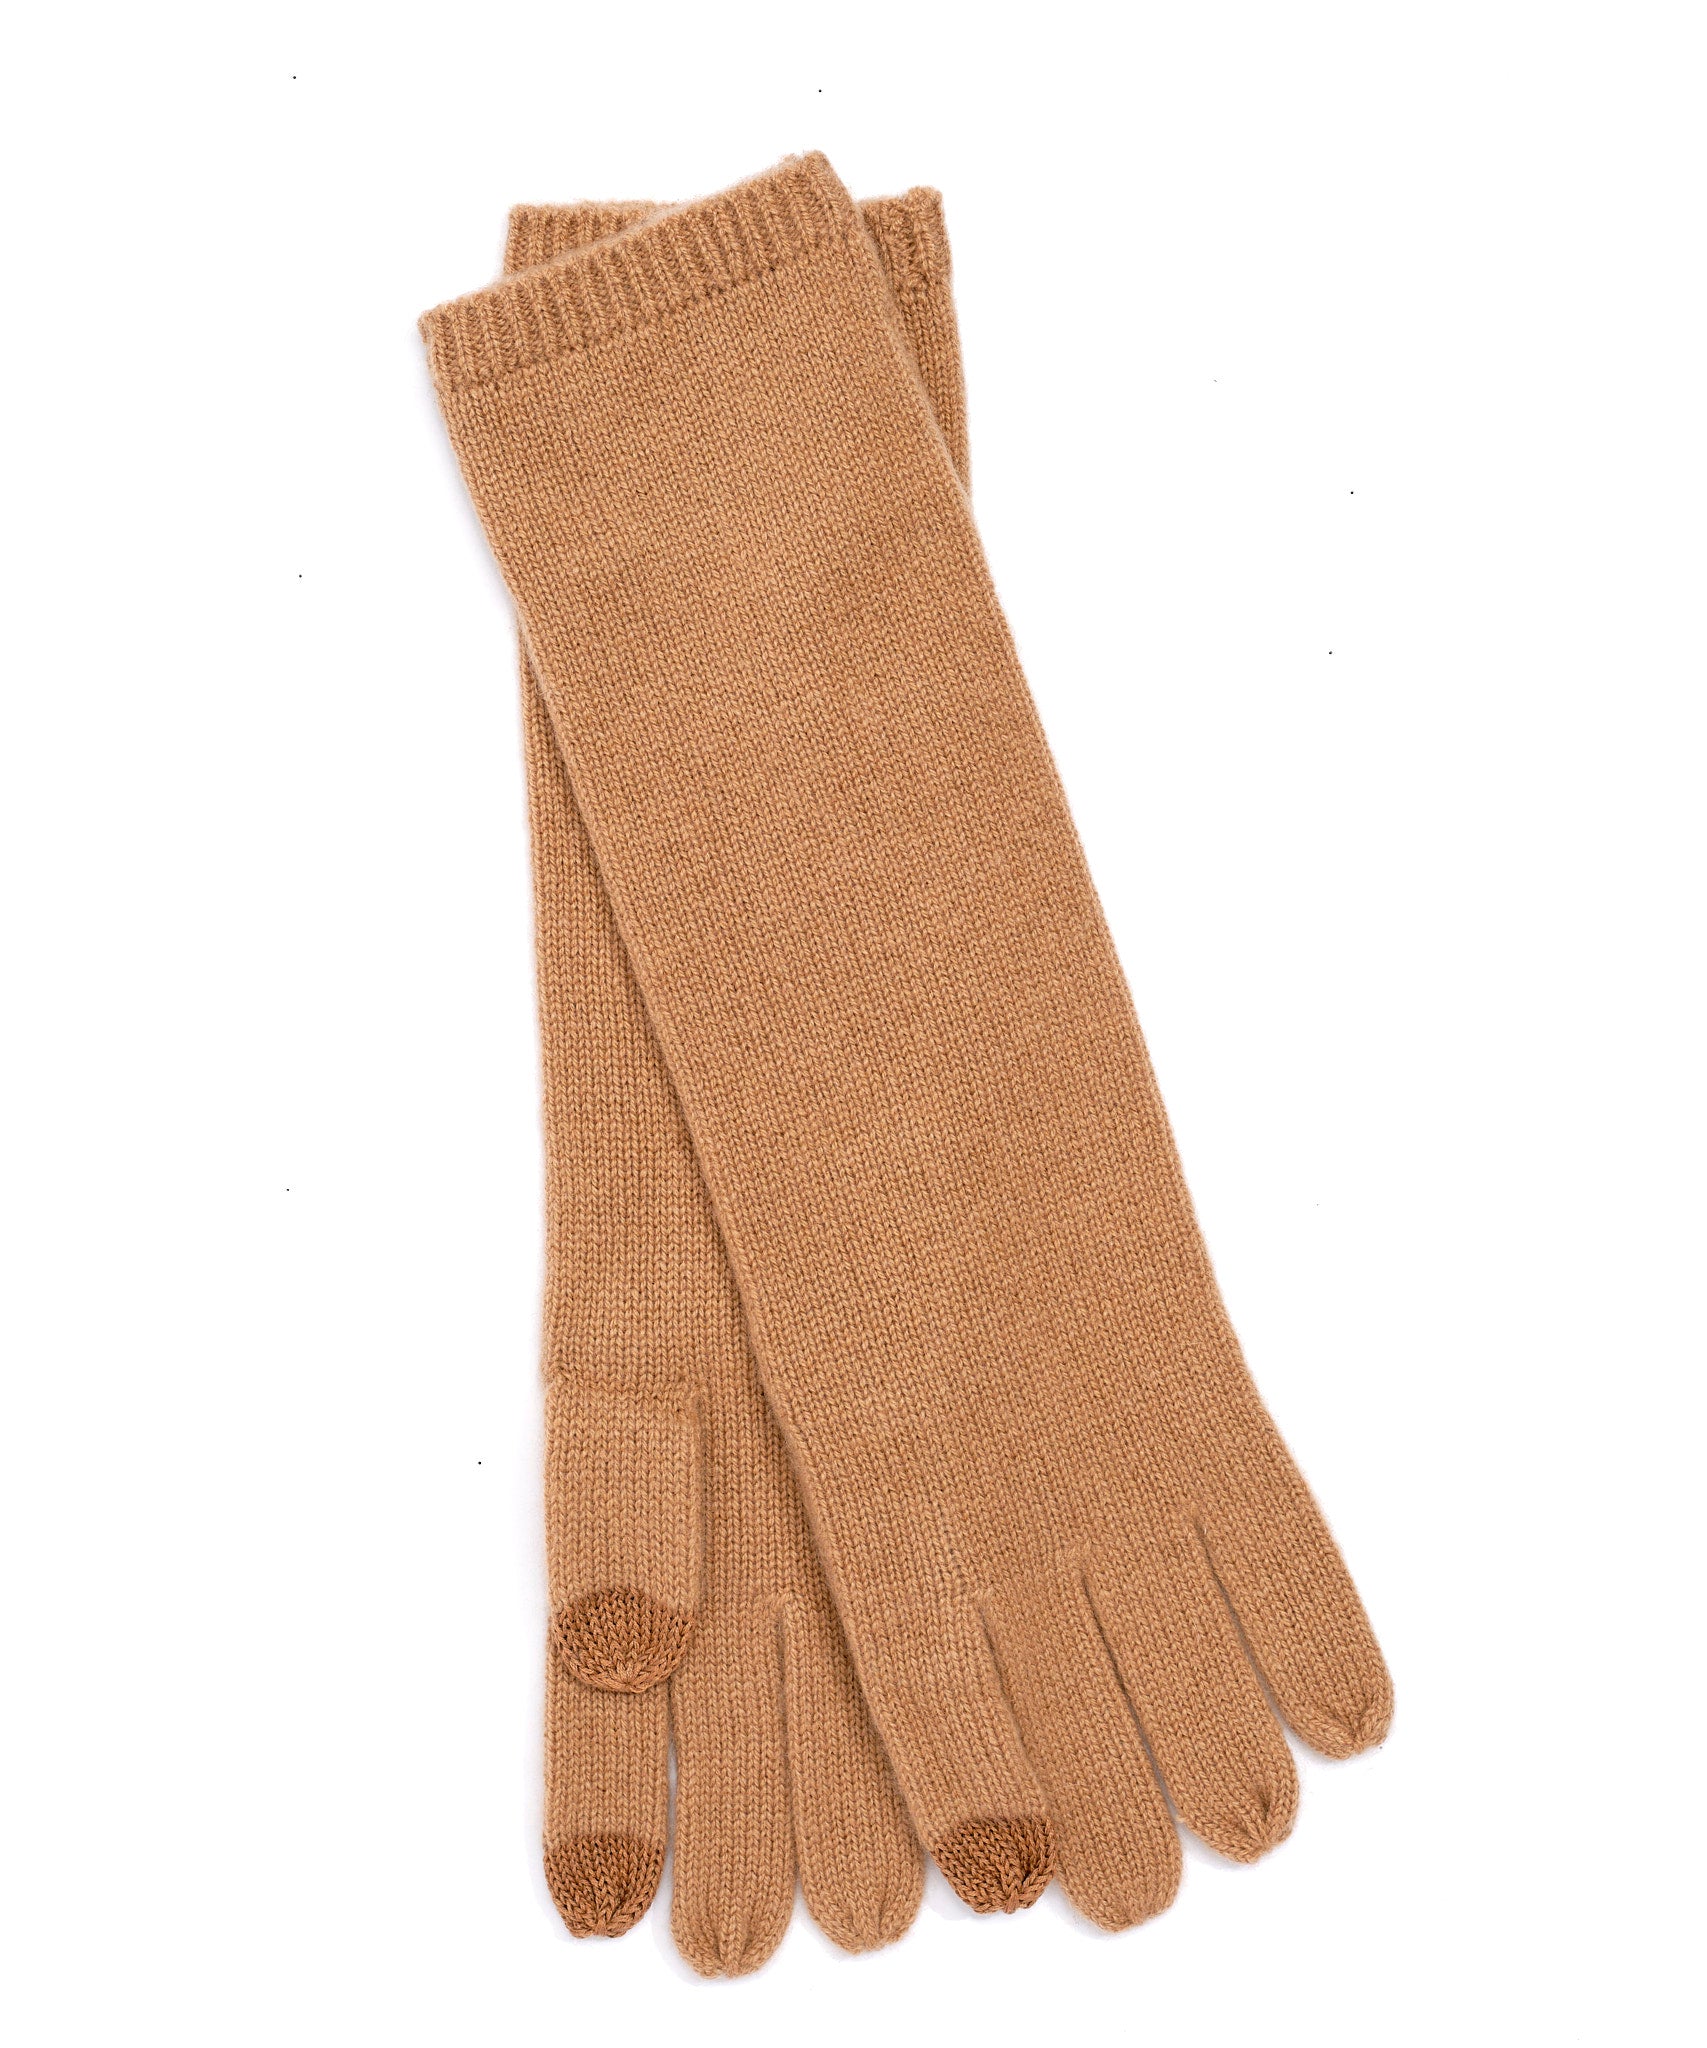 Cashmere Long Glove in color Camel Heather